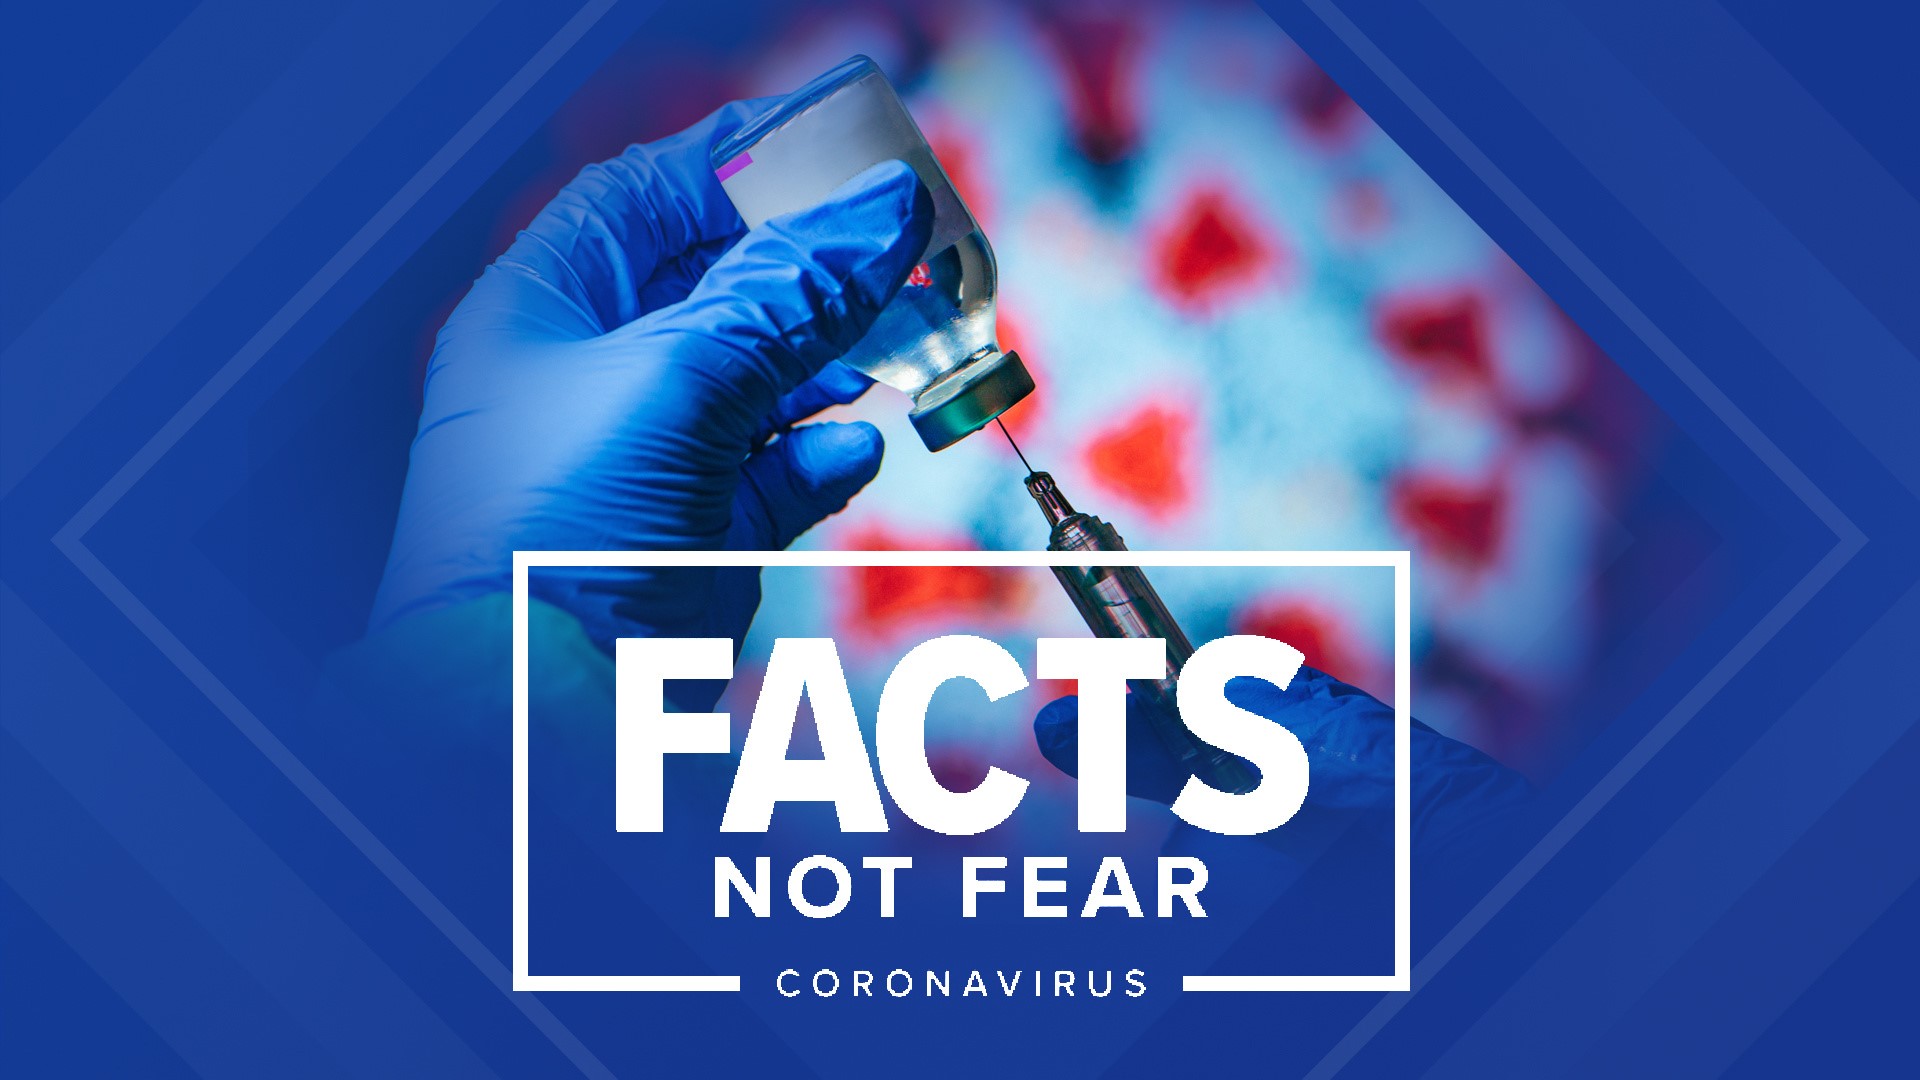 Medical experts have answers to common questions about the coronavirus vaccines.